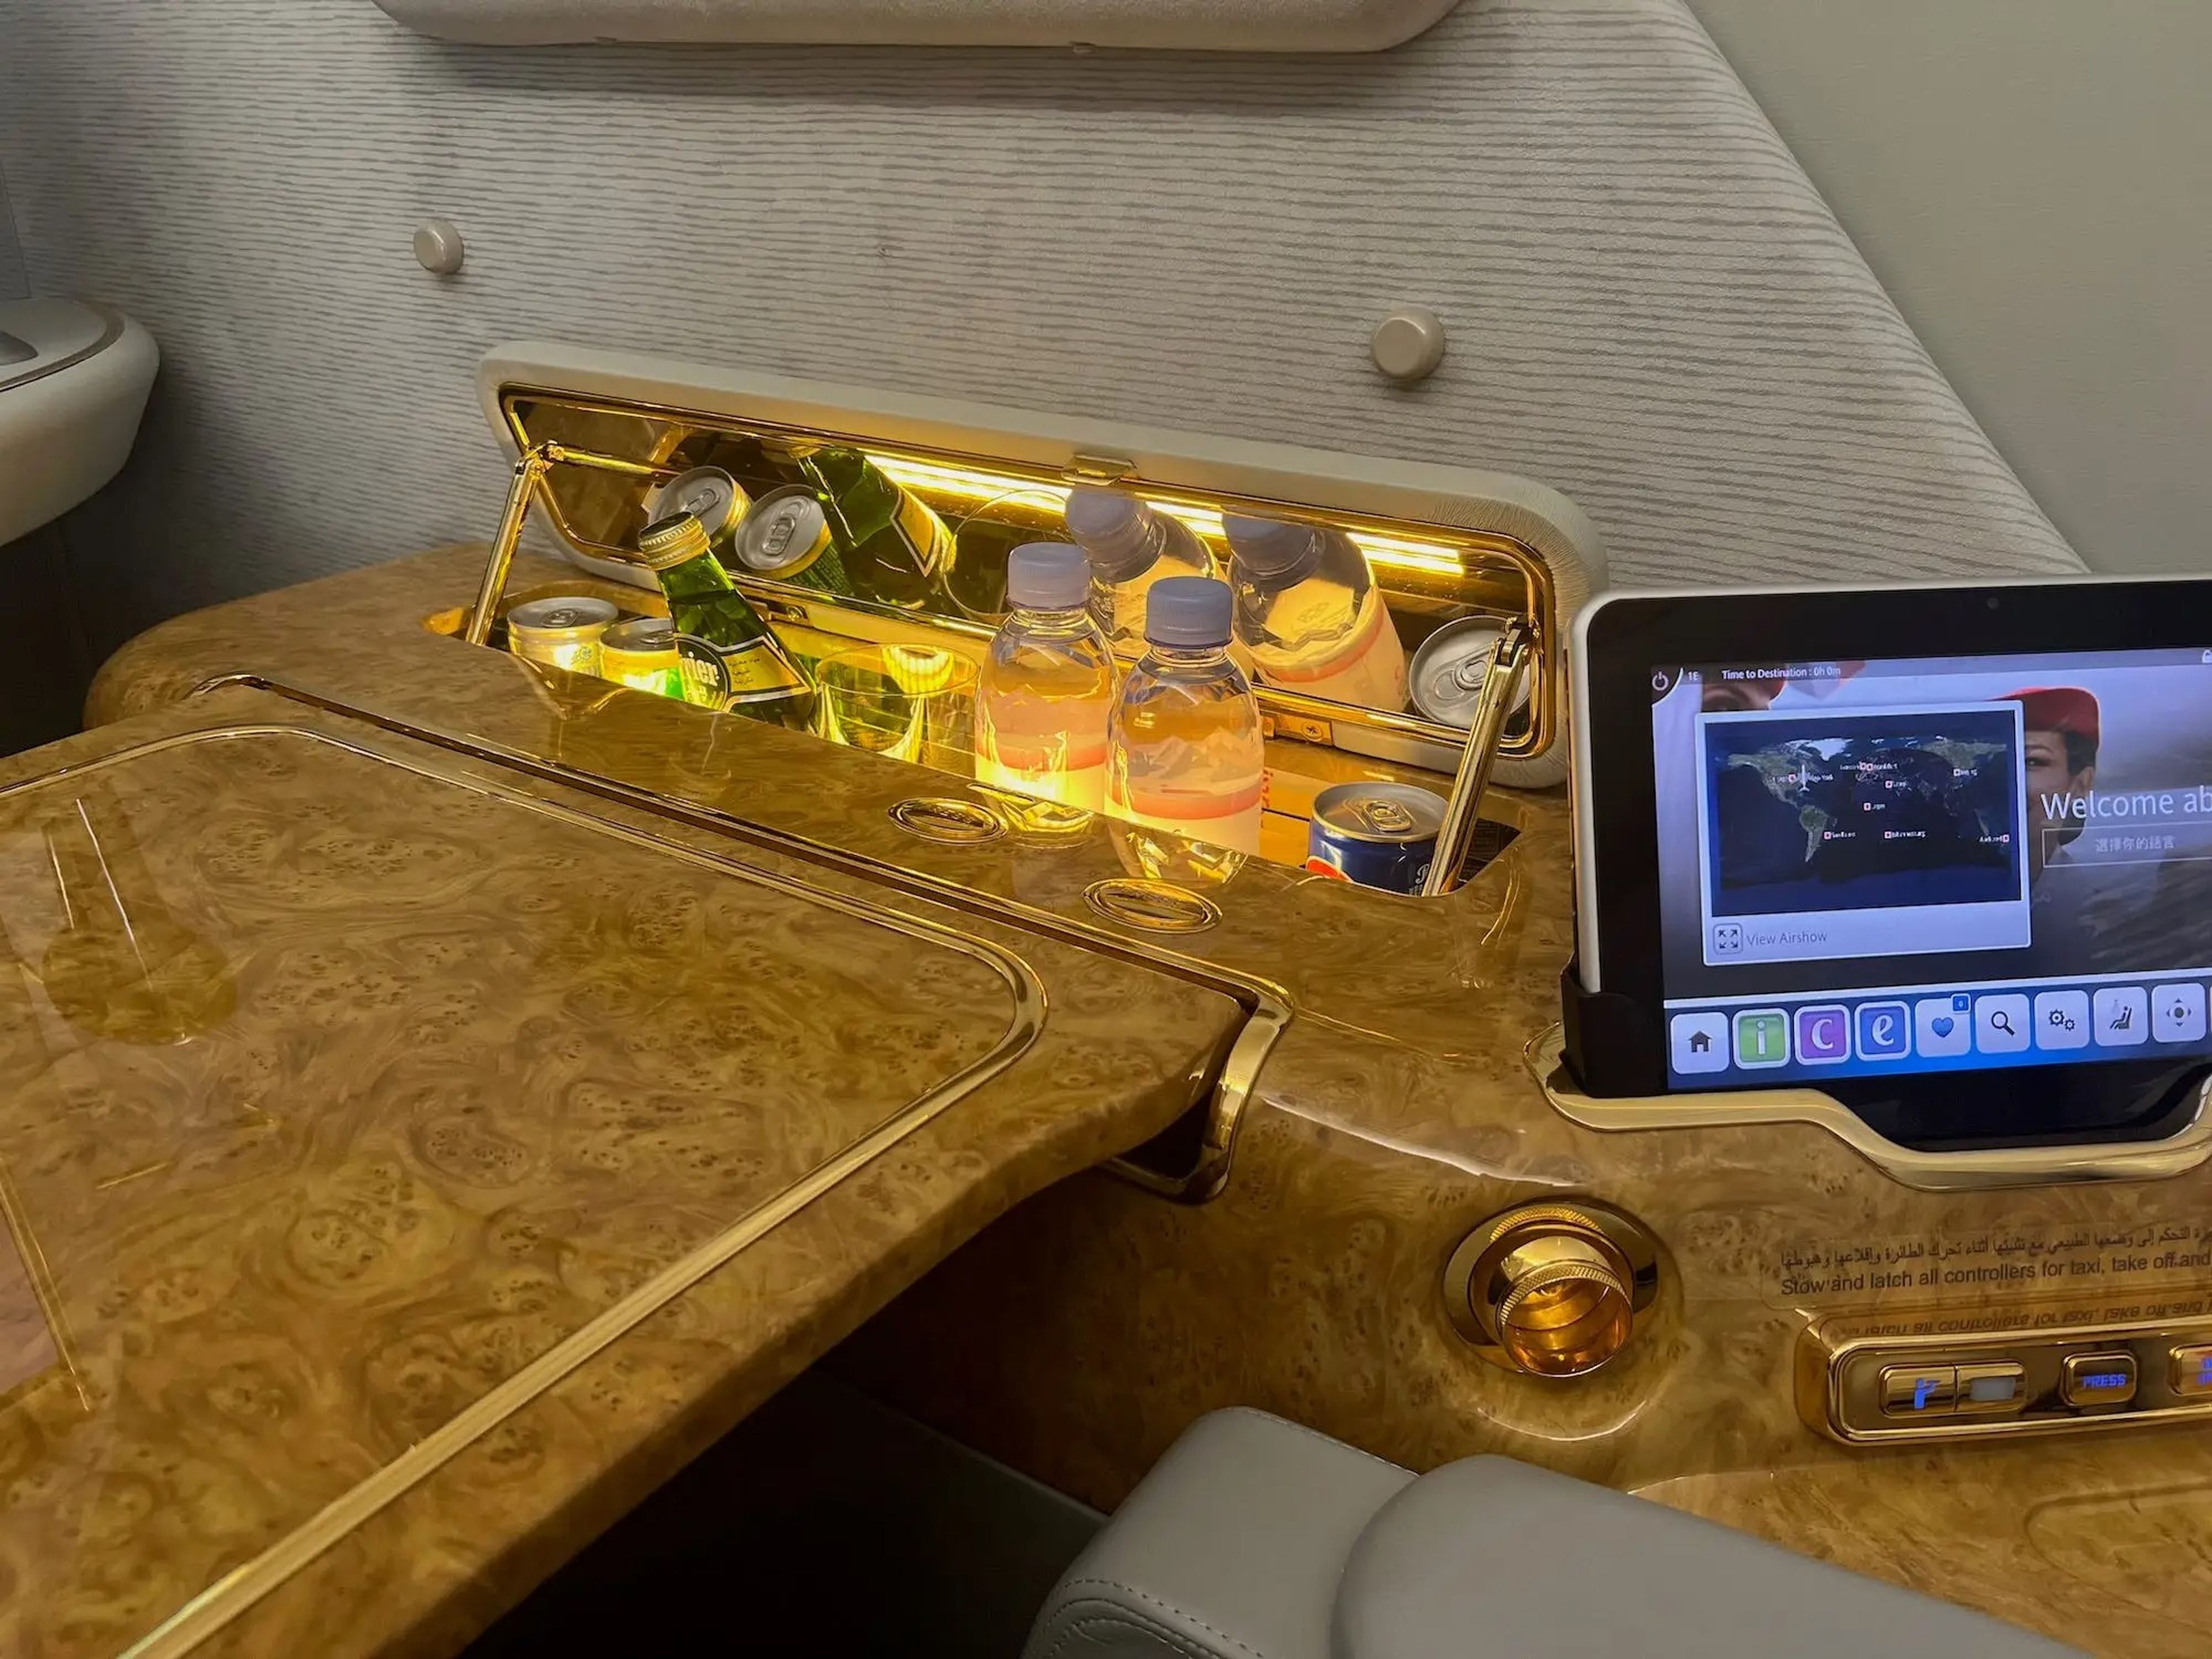 Emirates A380 first class suite.